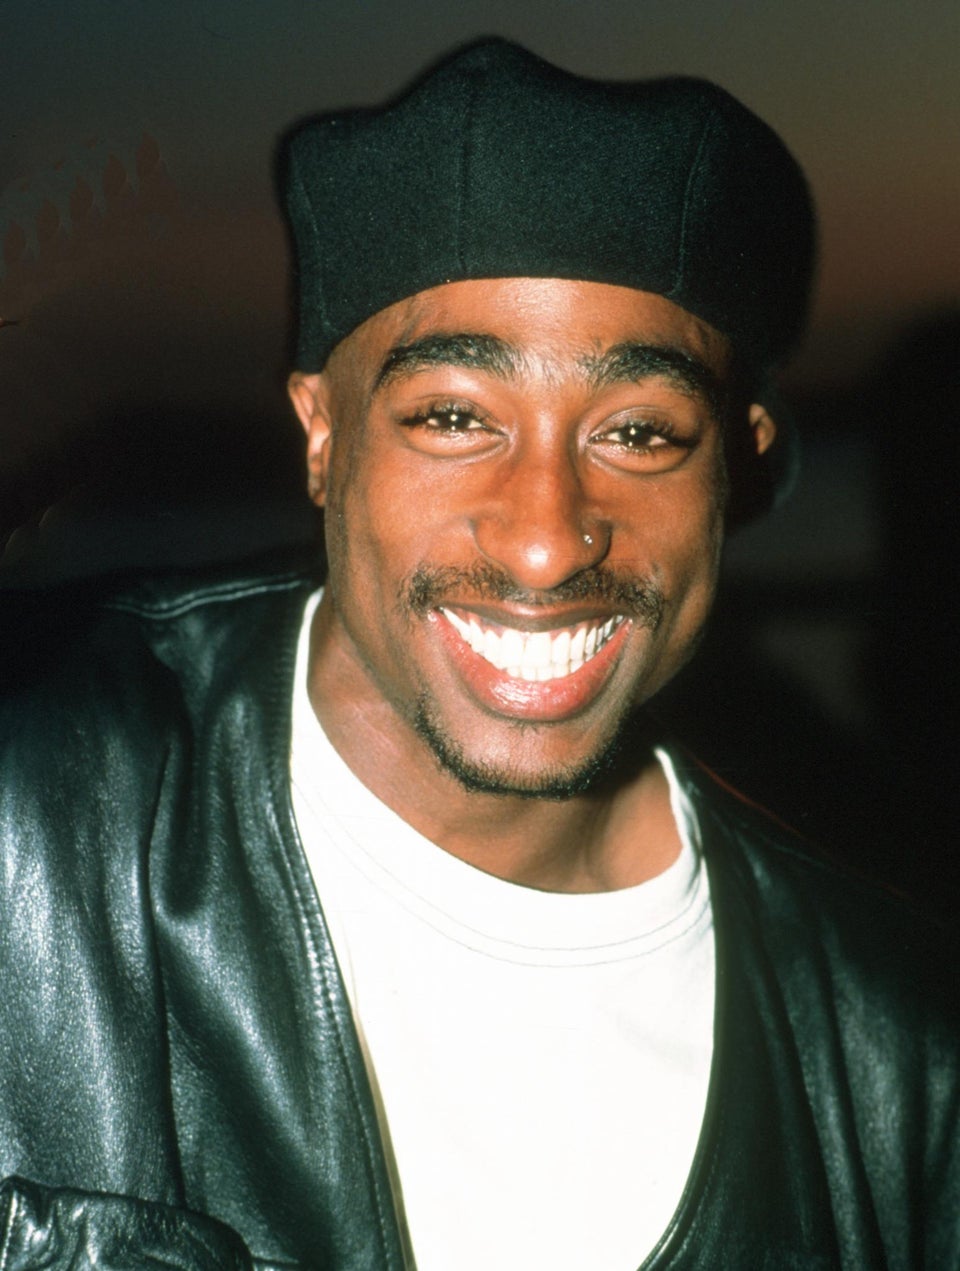 Tupac Shakur to be inducted into the Rock and Roll Hall of Fame